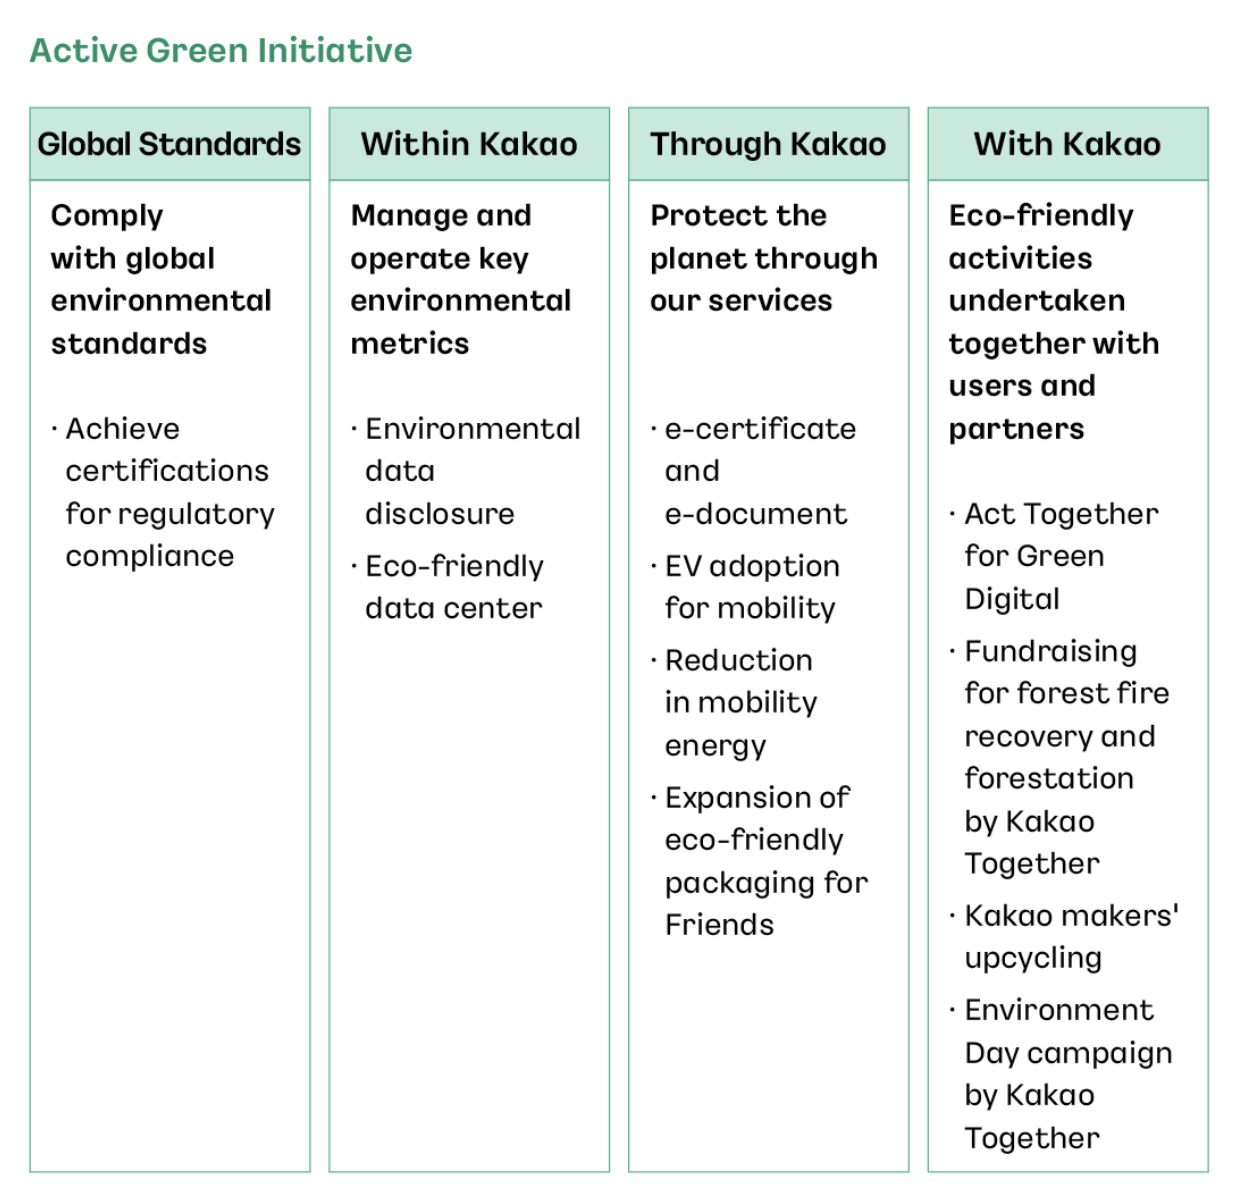 A table that shows Active Green Initiative divided into Global Standards, Within Kakao, Through Kakao, and With Kakao